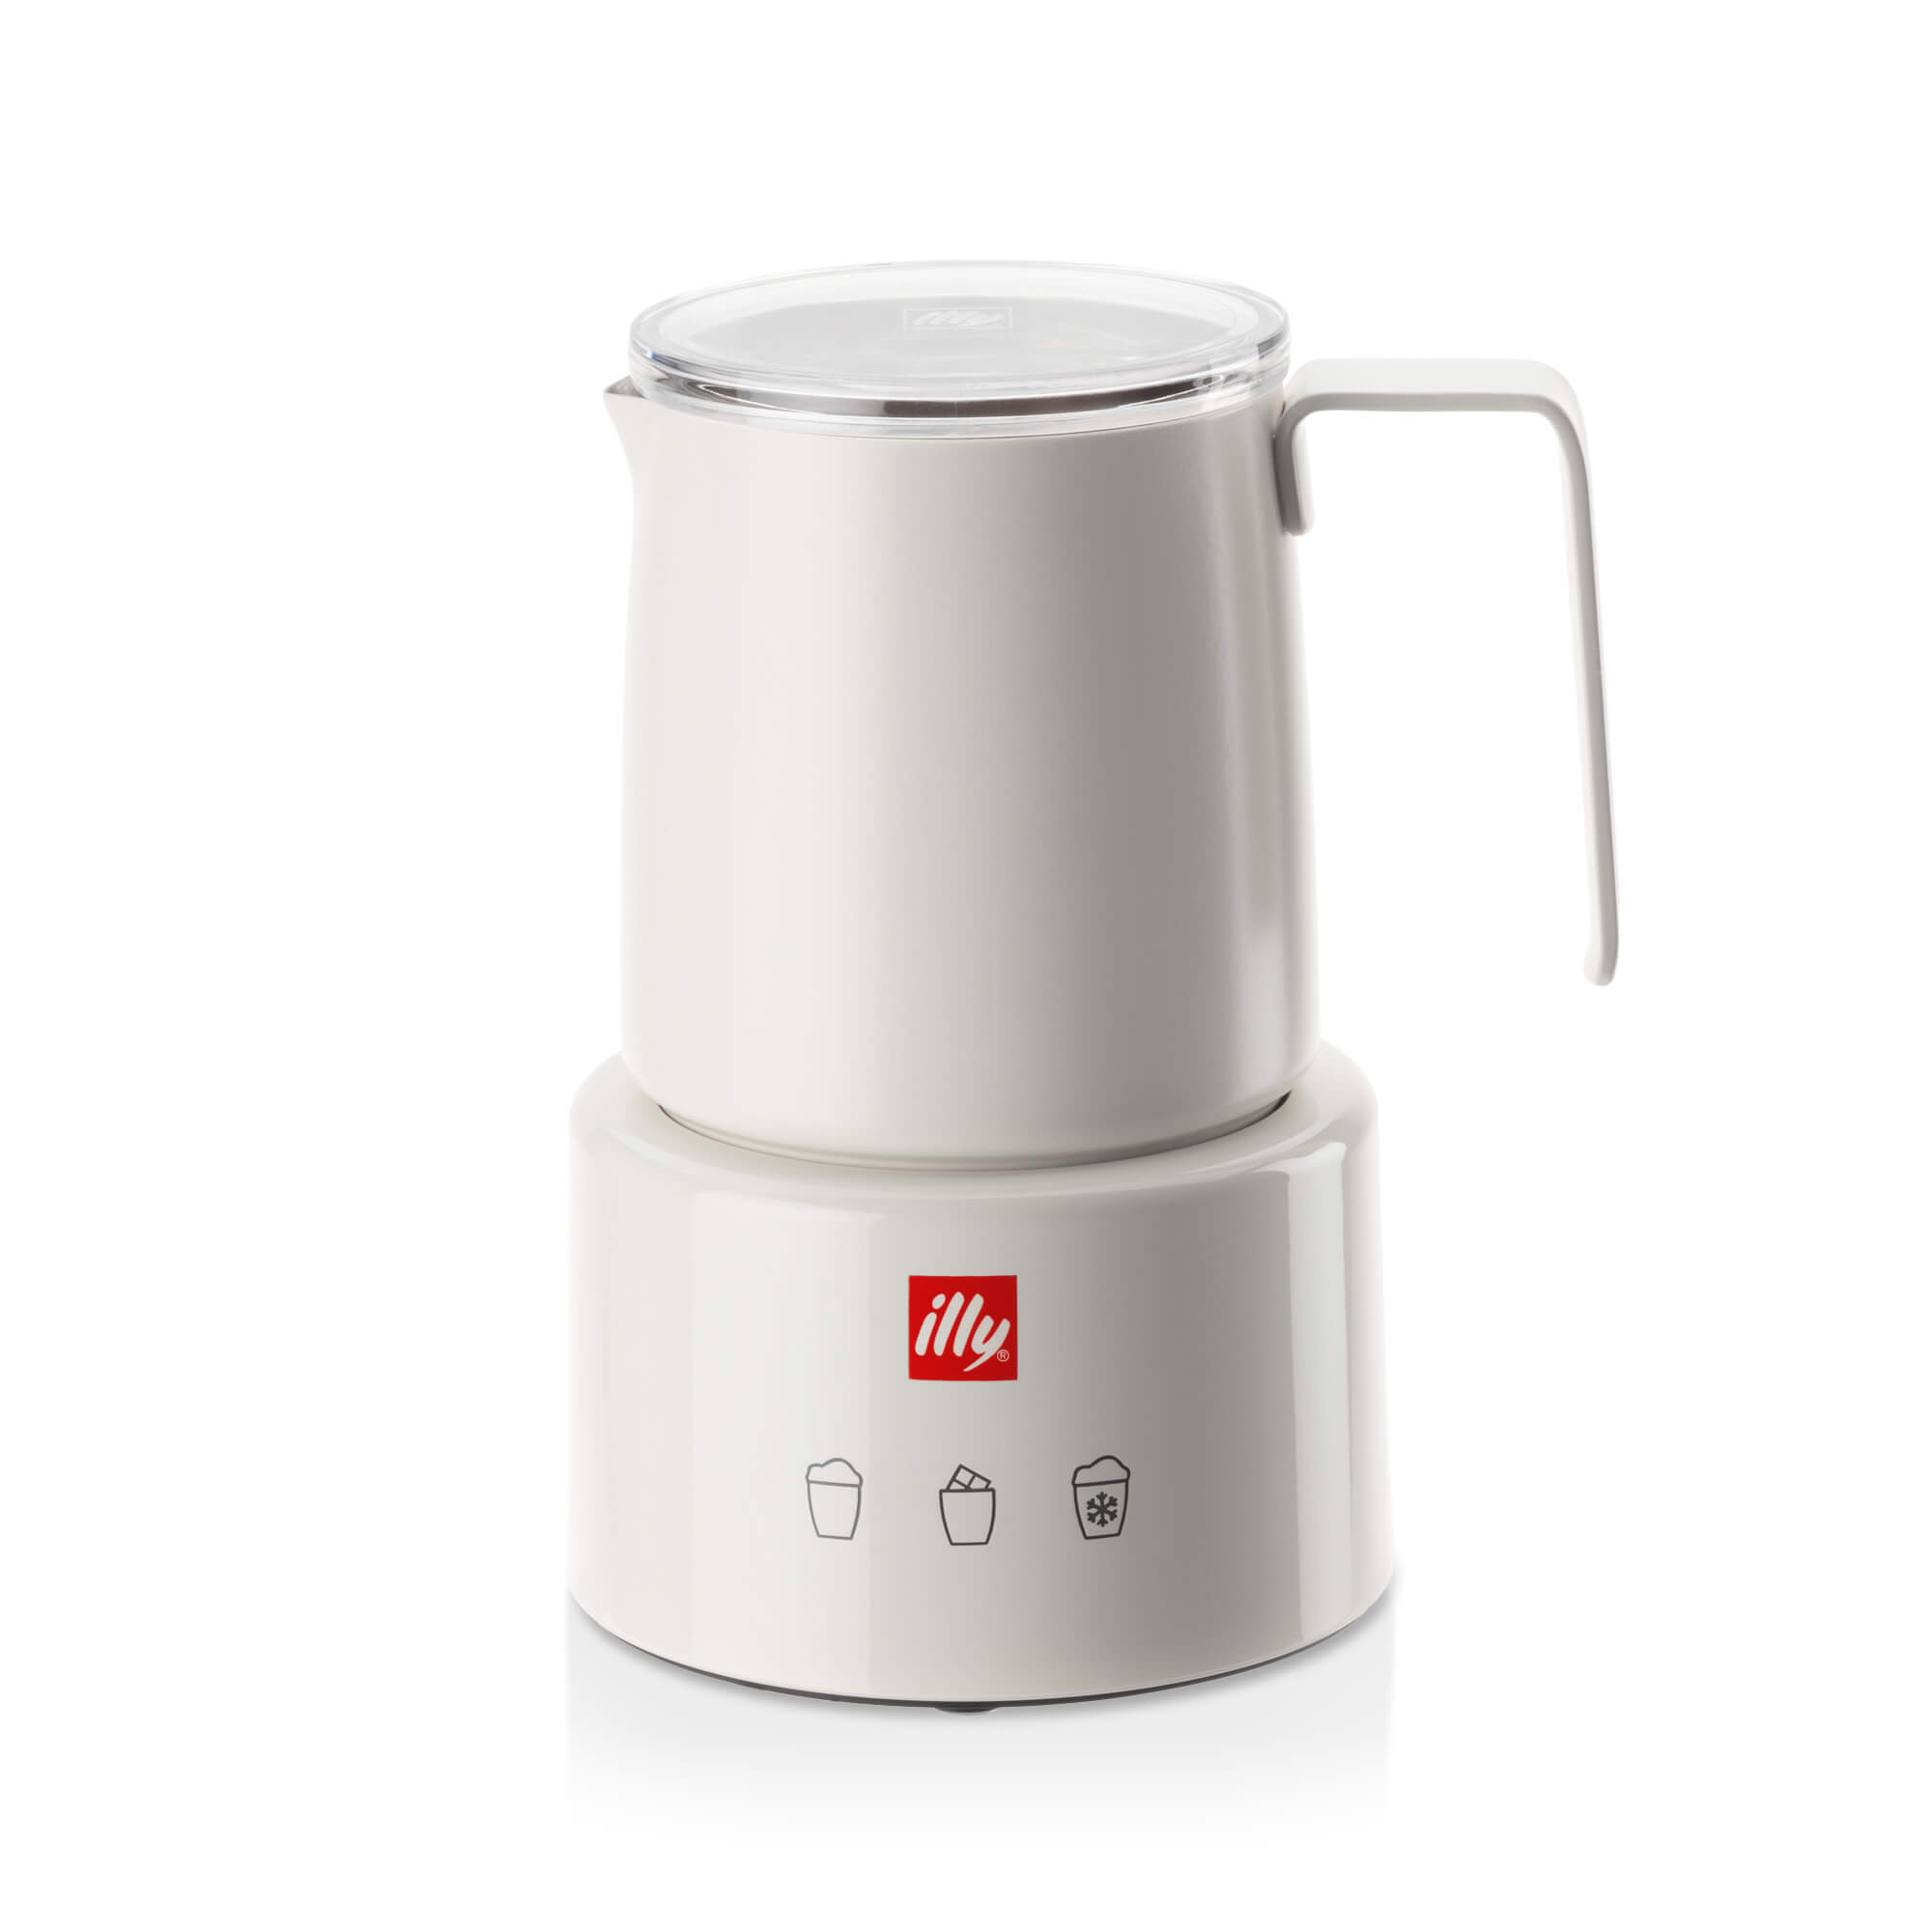 illy Electric Milk Frother White, Coffee Accessories, 02-07-0102